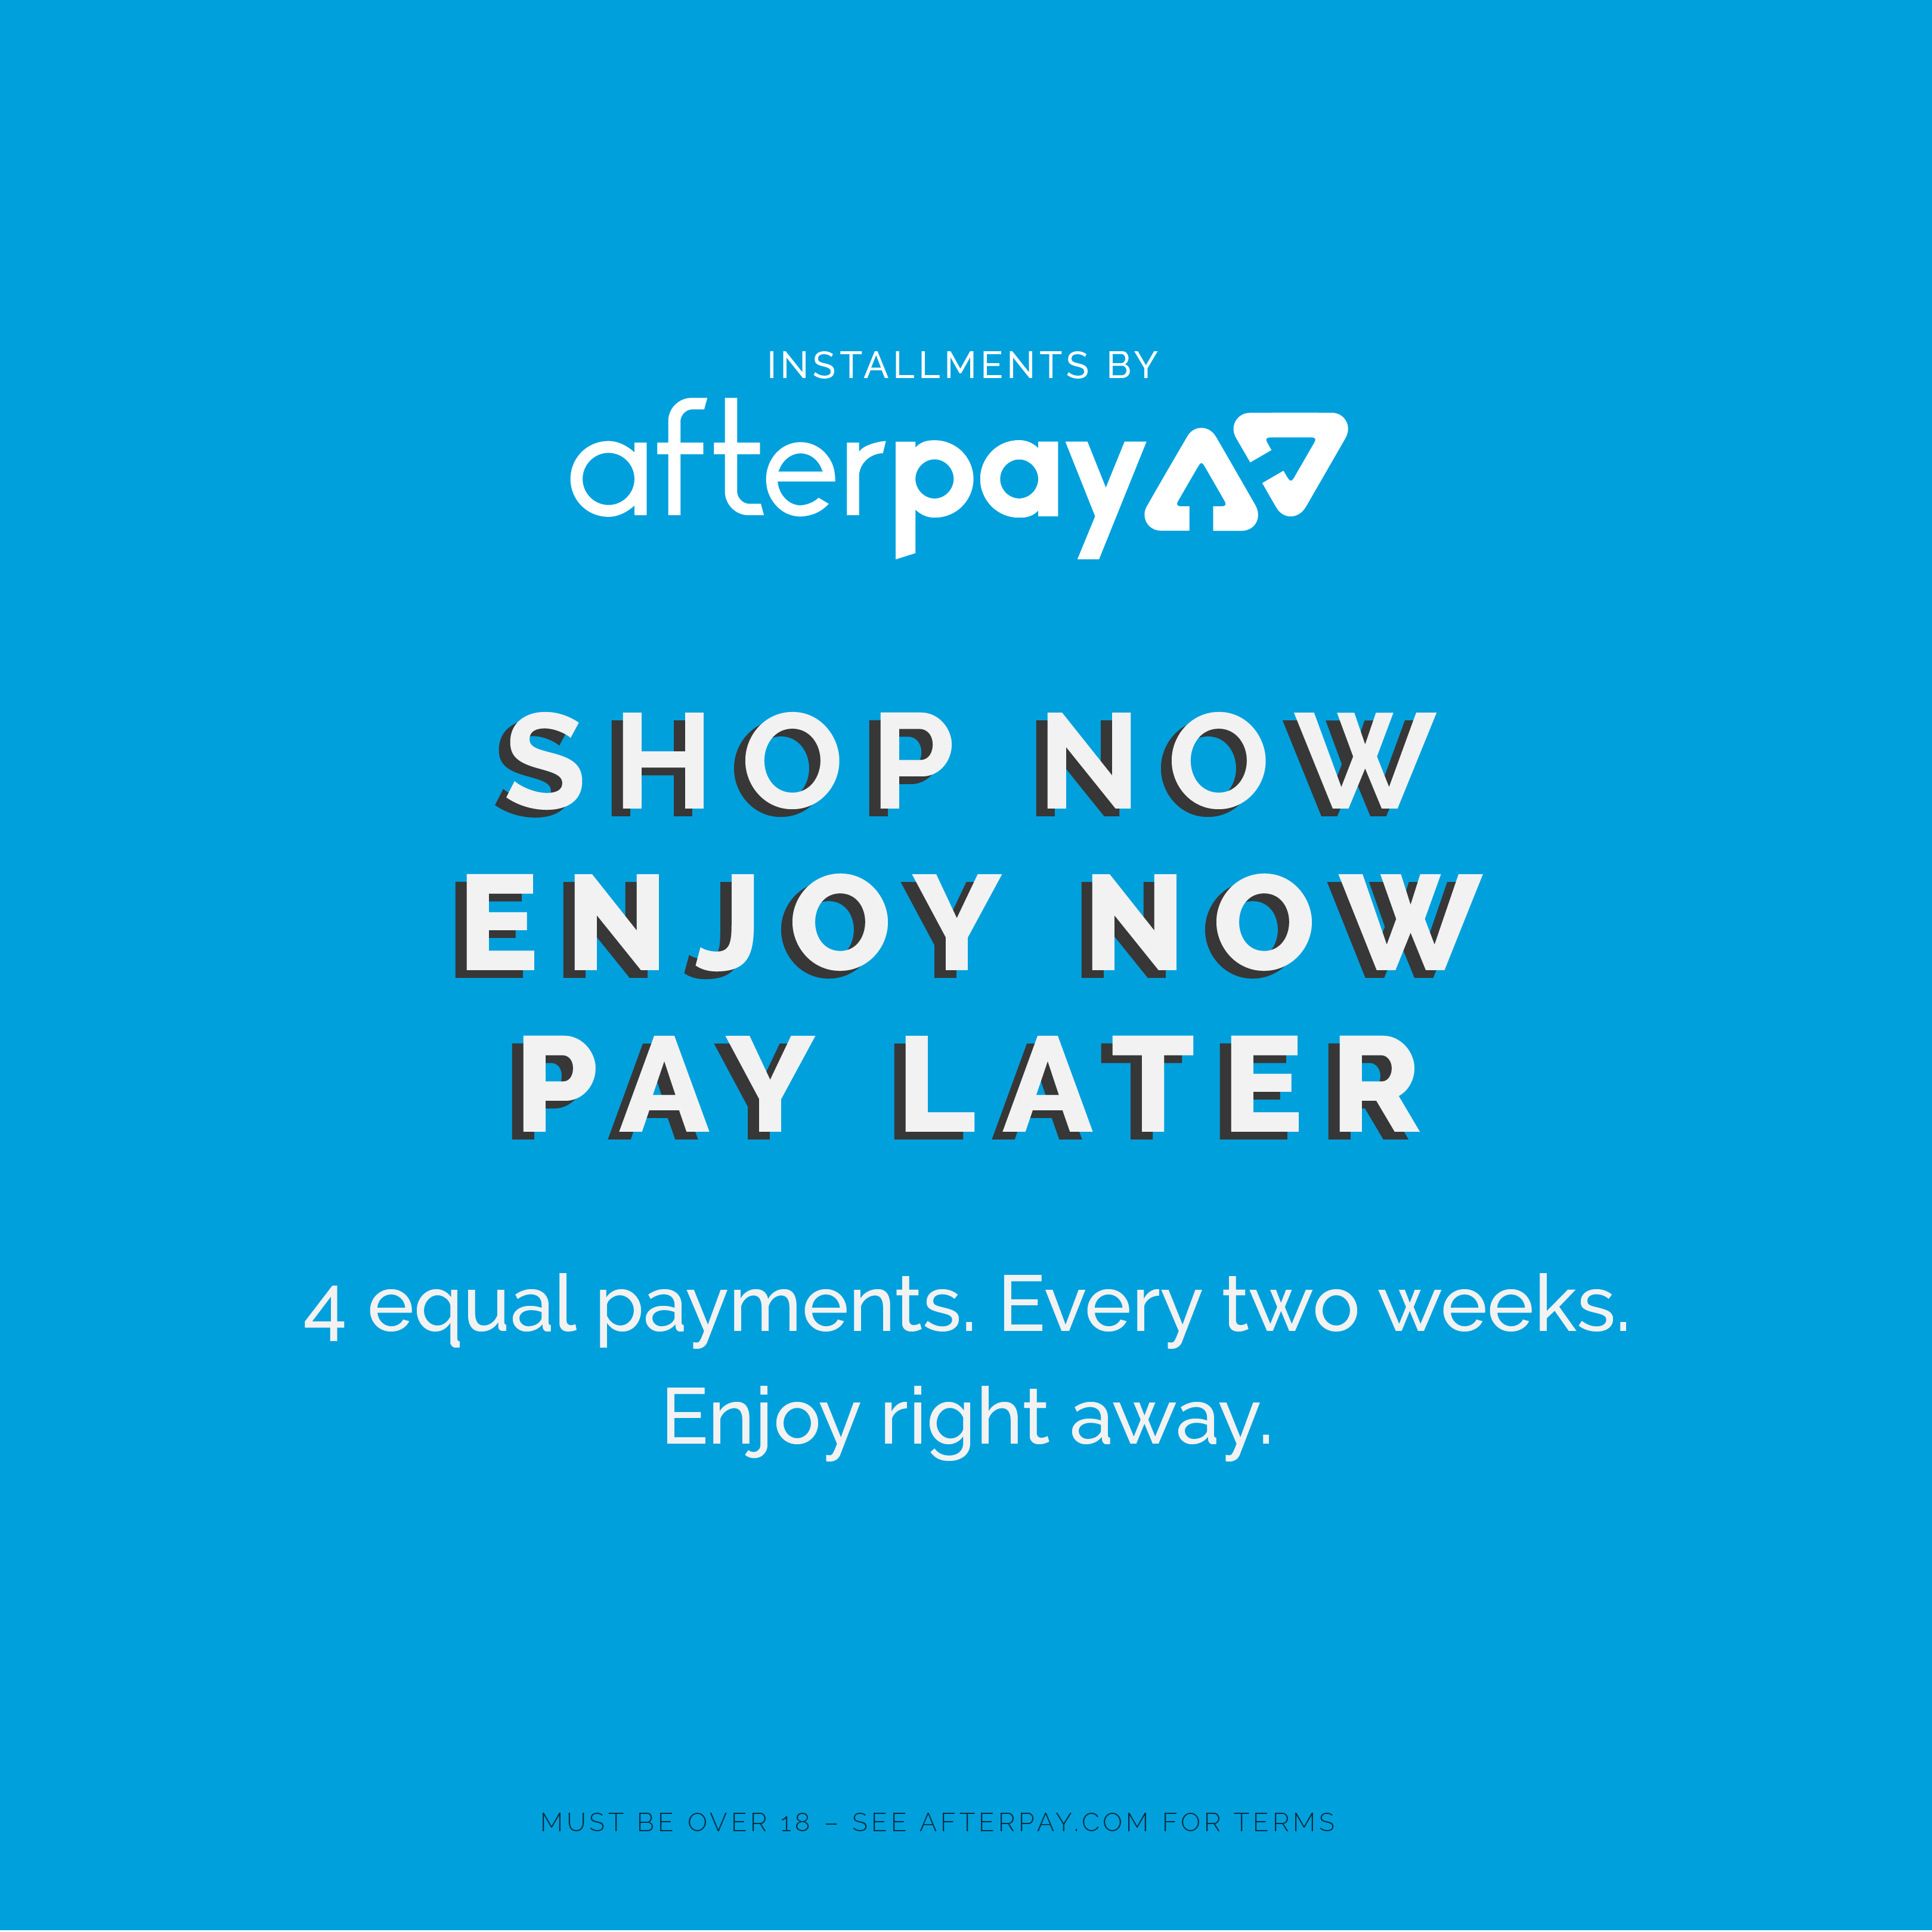 We are now offering AfterPay + a random extra story.